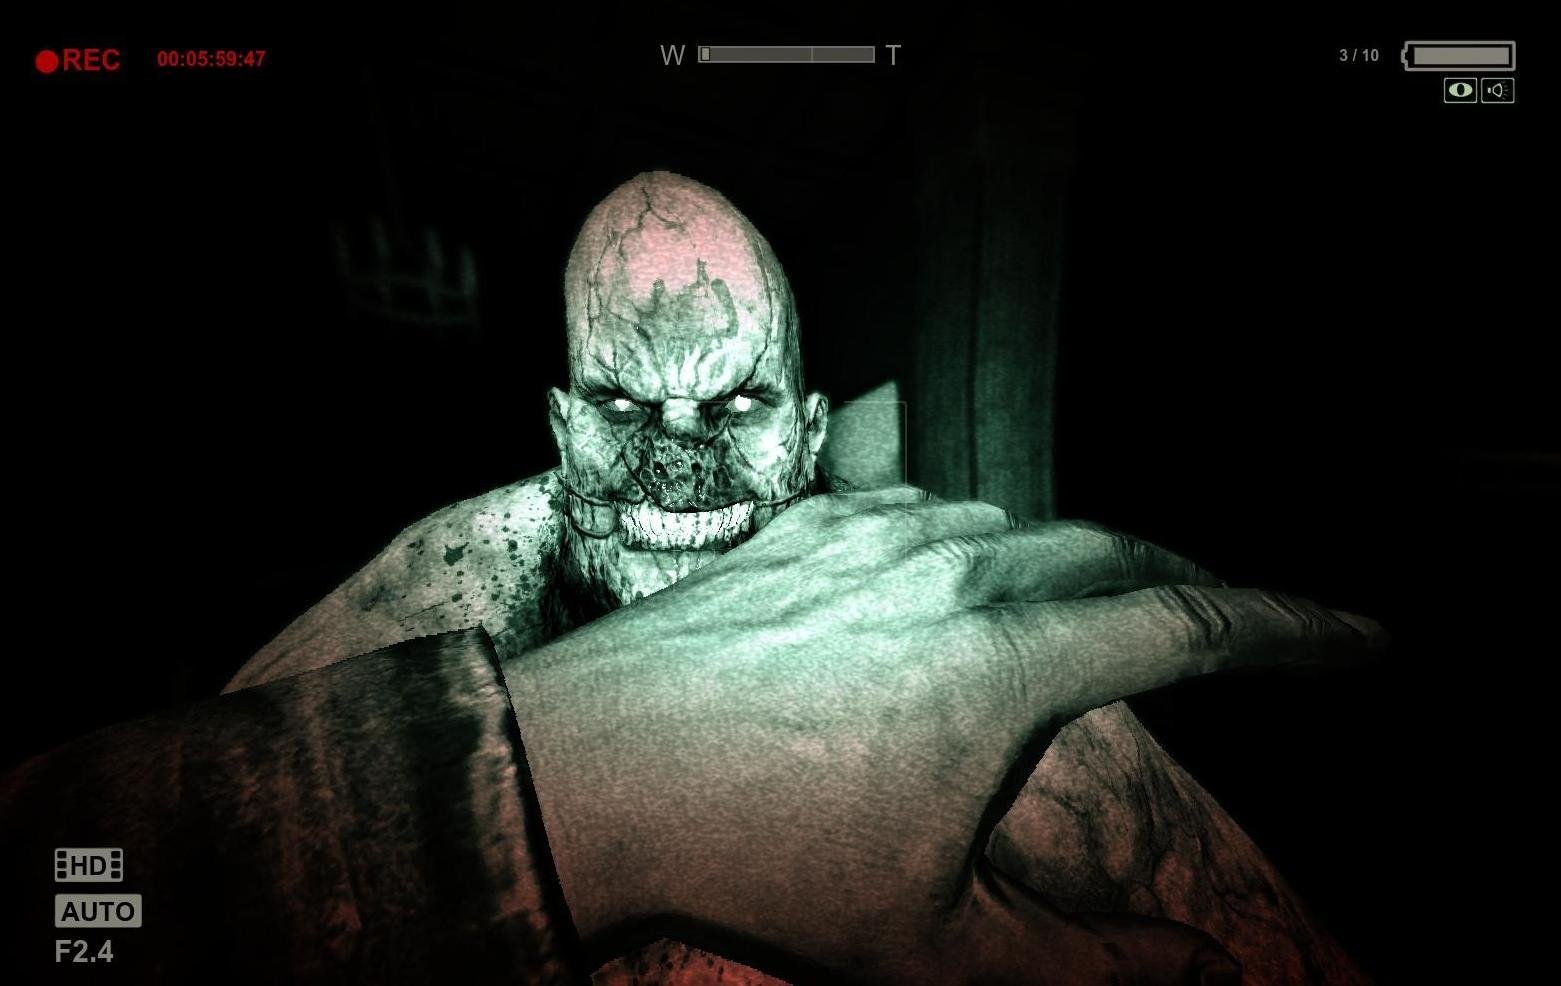 The Outlast Trials redefines multiplayer horror - Epic Games Store